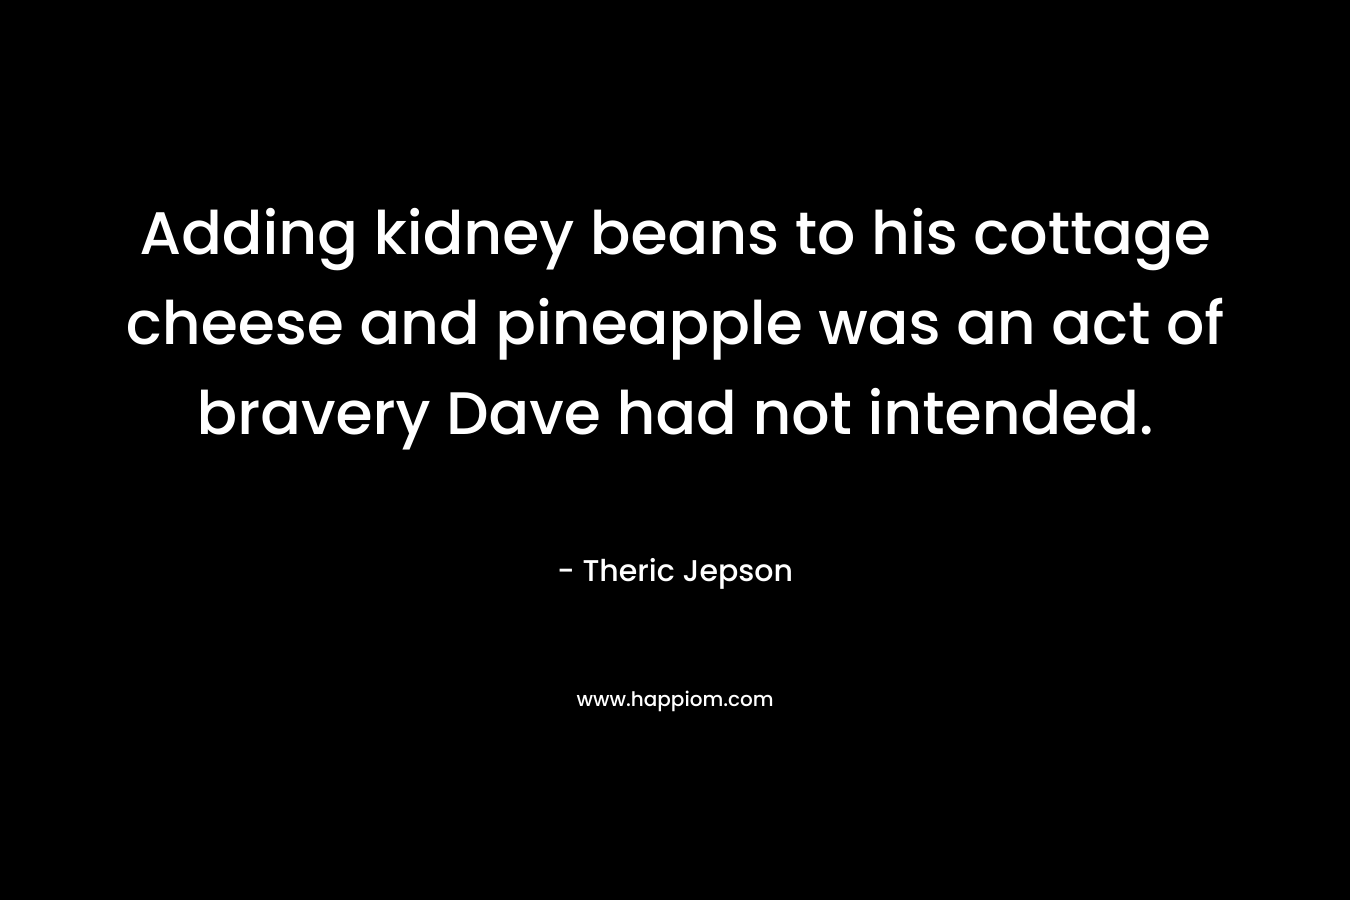 Adding kidney beans to his cottage cheese and pineapple was an act of bravery Dave had not intended. – Theric Jepson